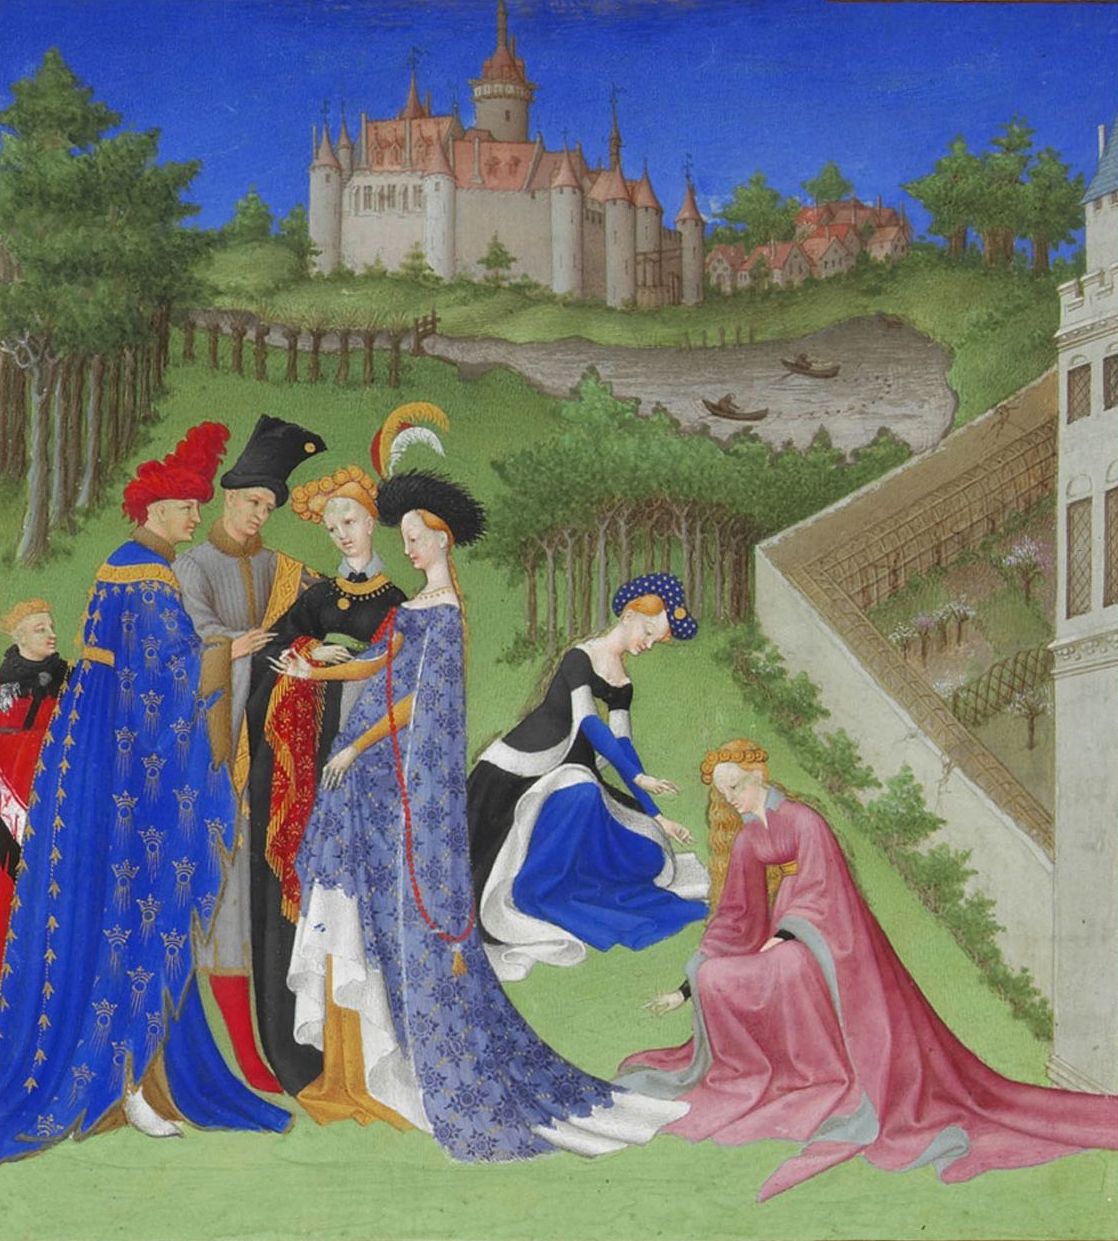 Outrageous Women of the Middle Ages